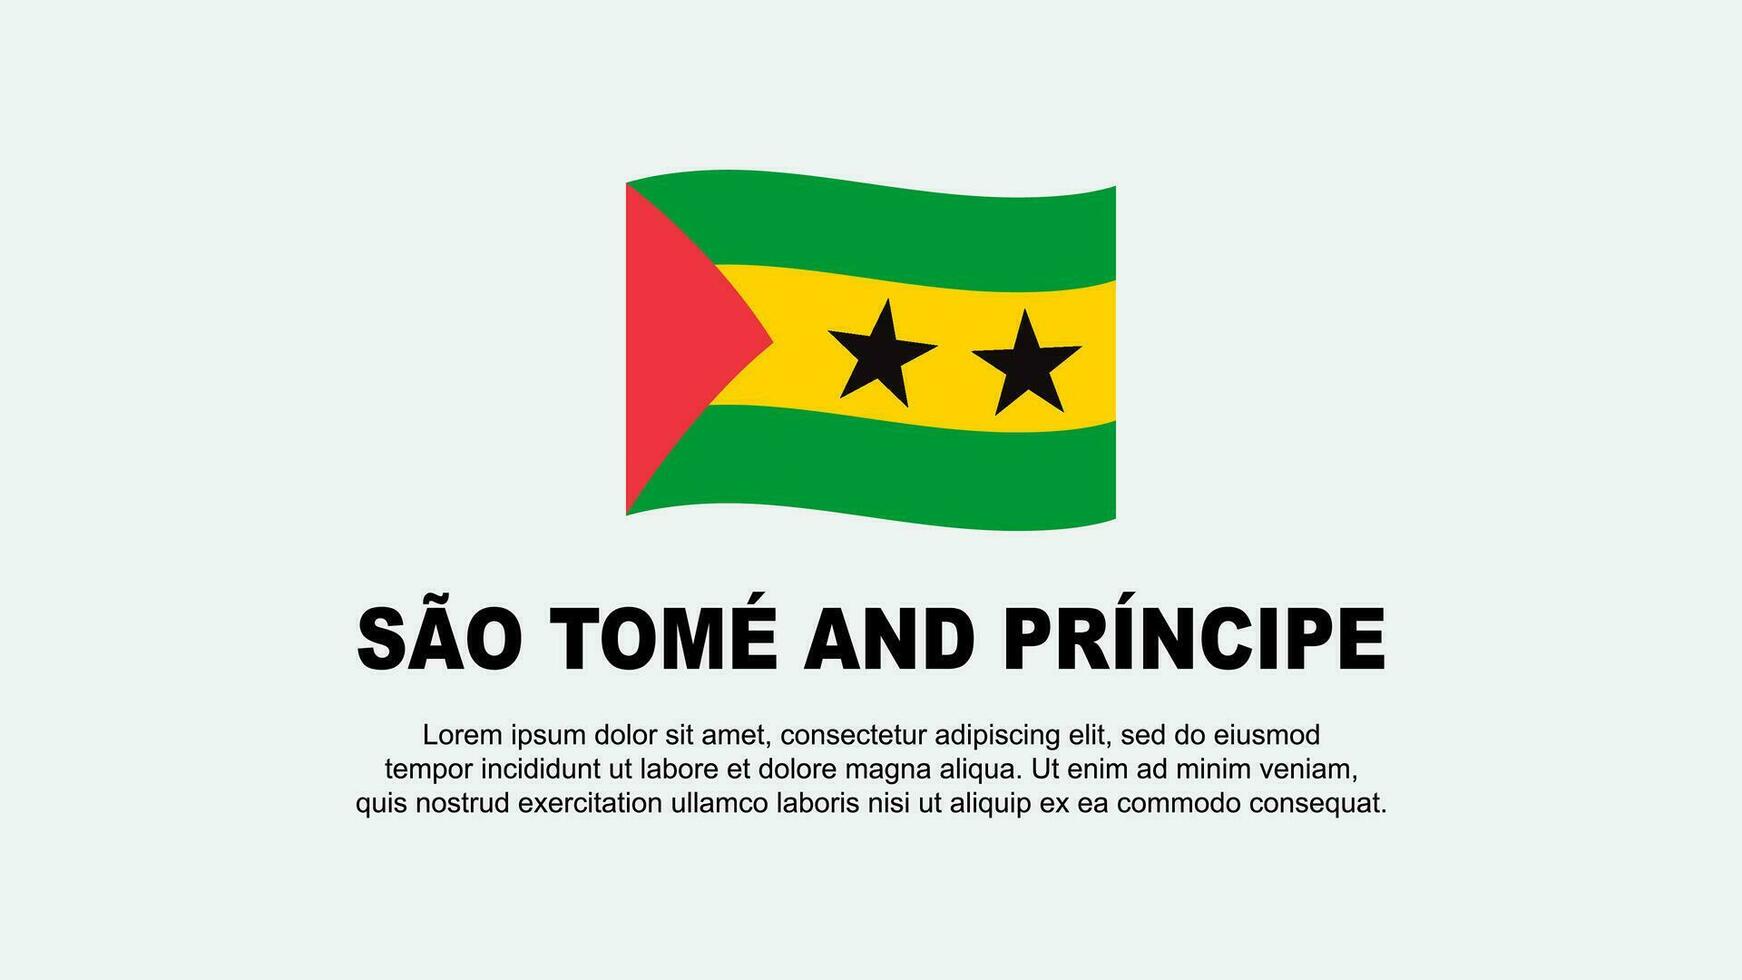 Sao Tome And Principe Flag Abstract Background Design Template. Sao Tome And Principe Independence Day Banner Social Media Vector Illustration. Background